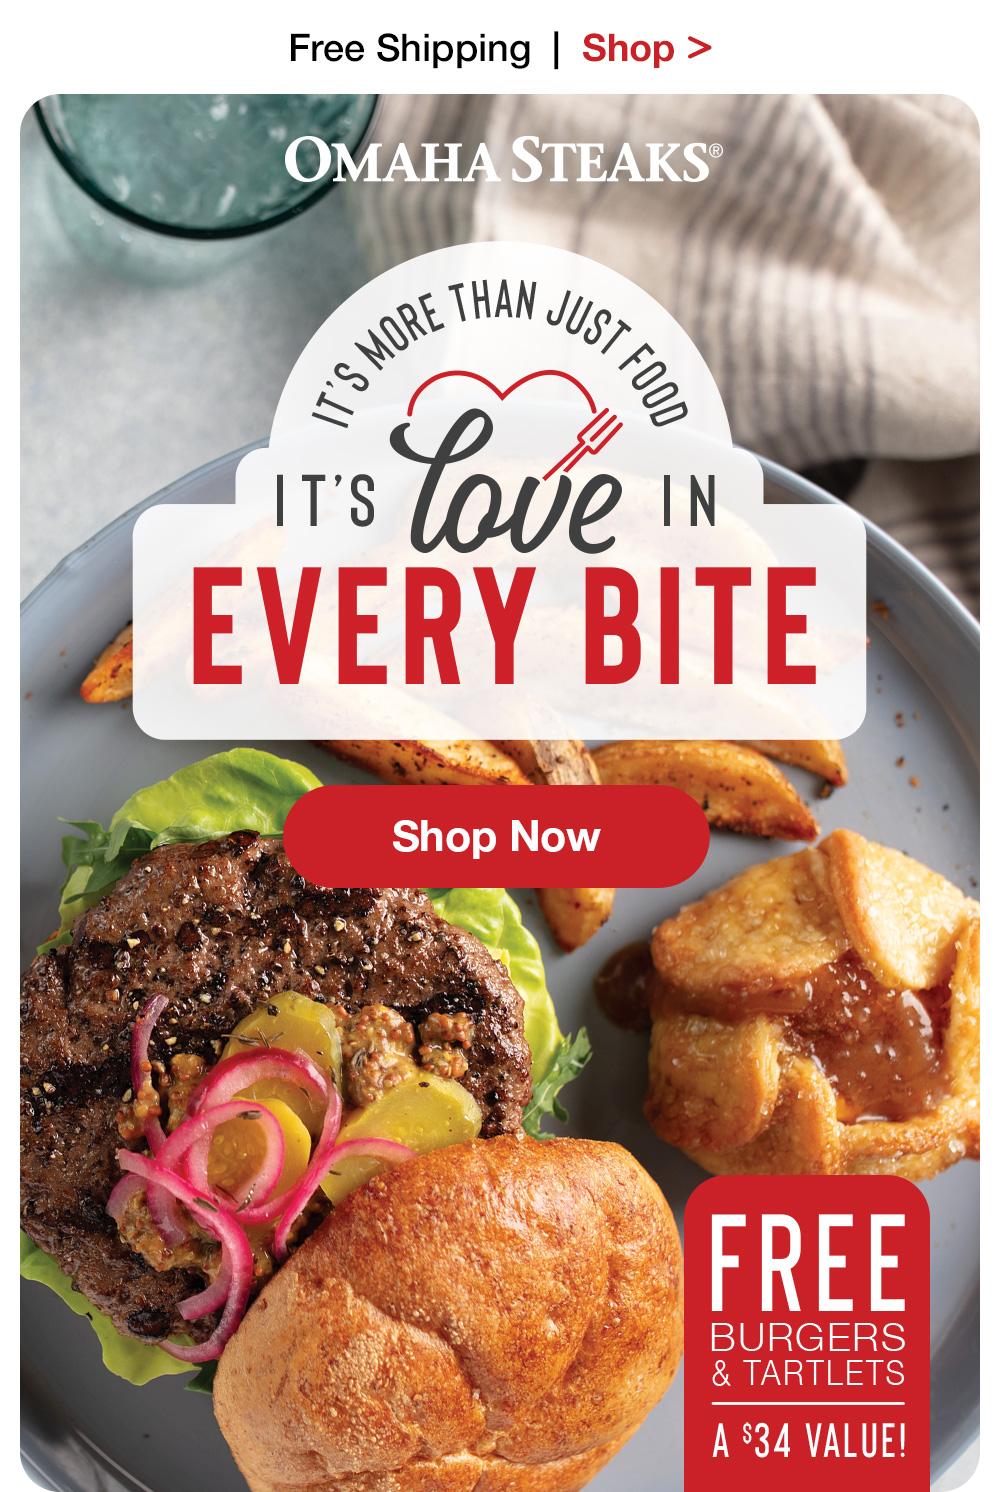 Free Shipping | Shop >  ОМАНА STEAKS® It's more than just food | IT's love IN EVERY BITE || Shop Now || FREE BURGERS & TARTLETS A $34 VALUE!